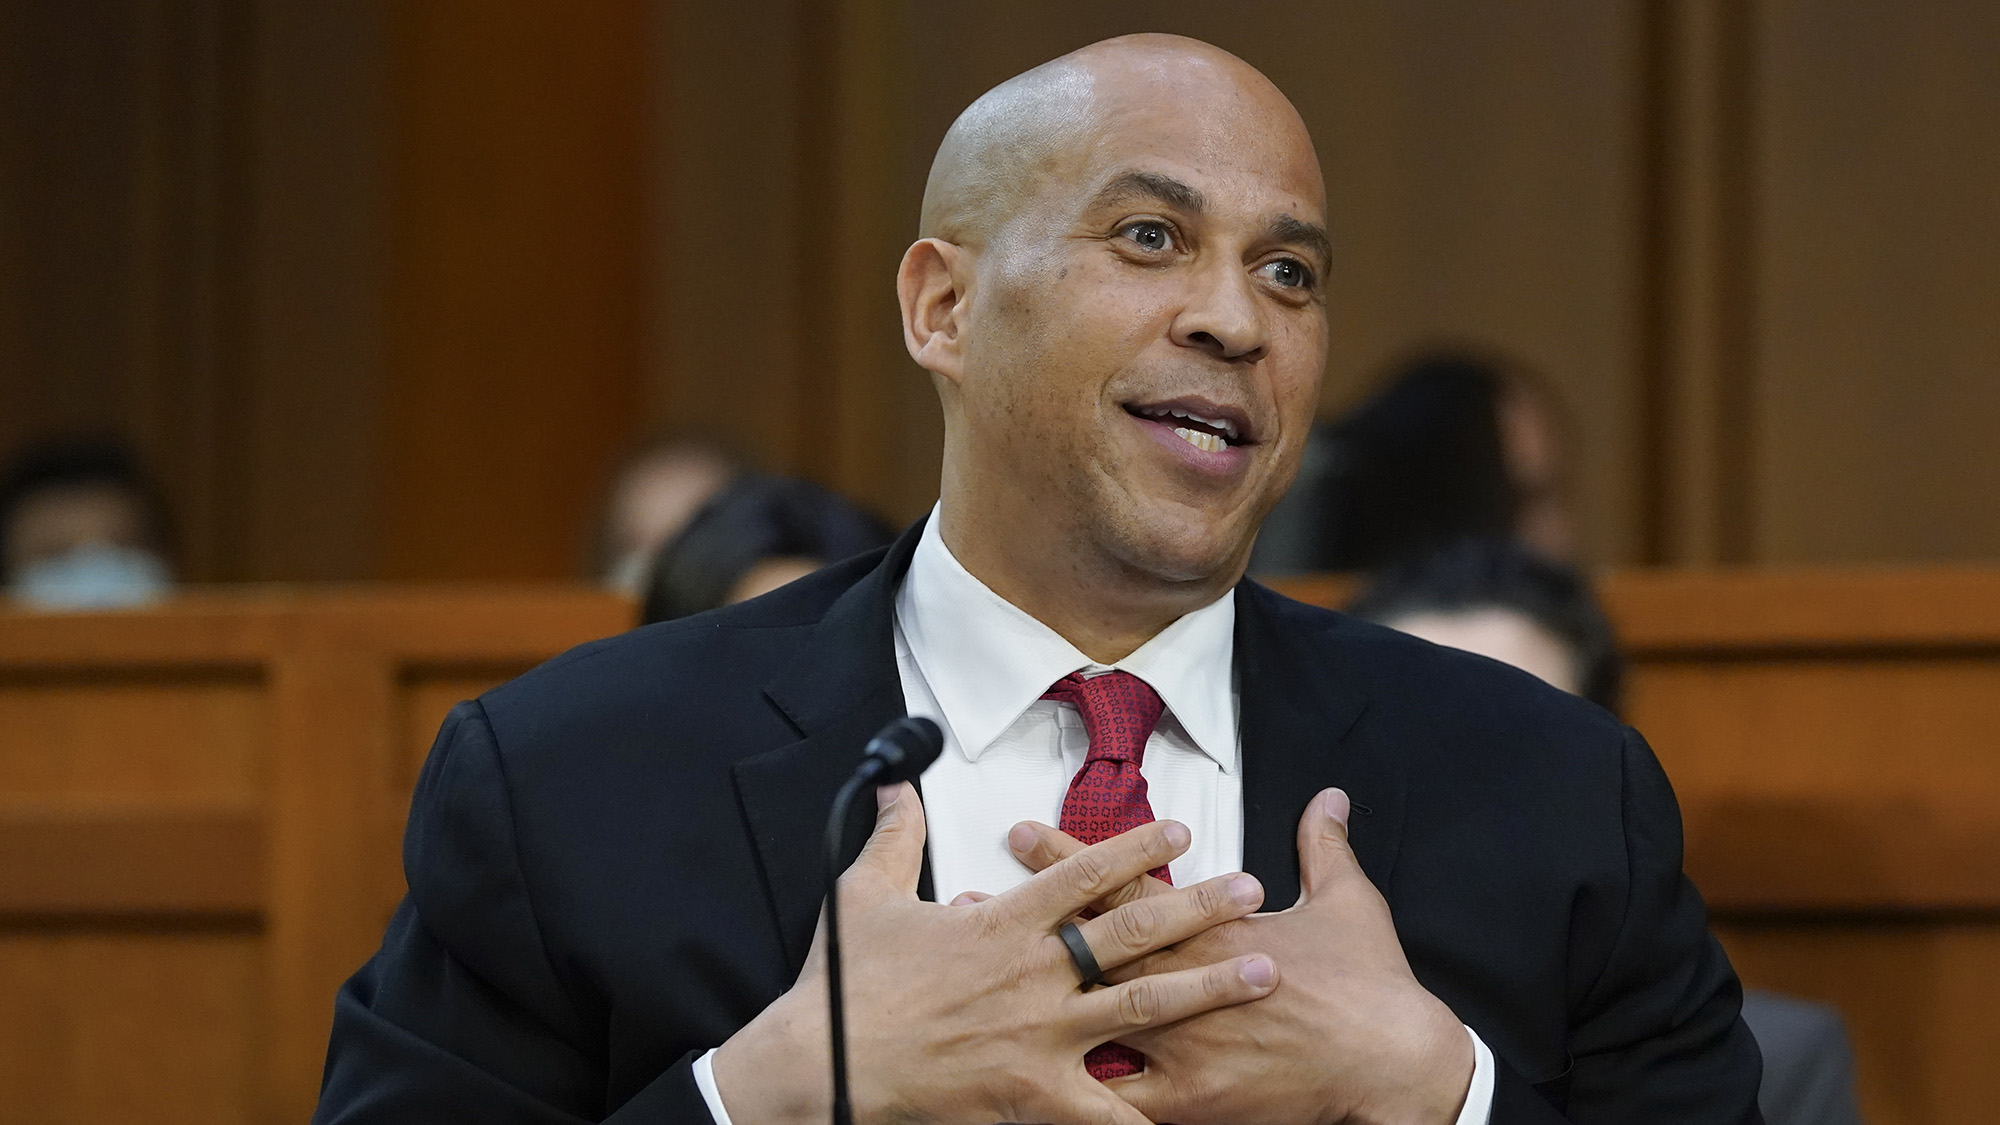 Sen. Cory Booker, speaks during a confirmation hearing for Supreme Court nominee Ketanji Brown Jackson on Wednesday, March 23.